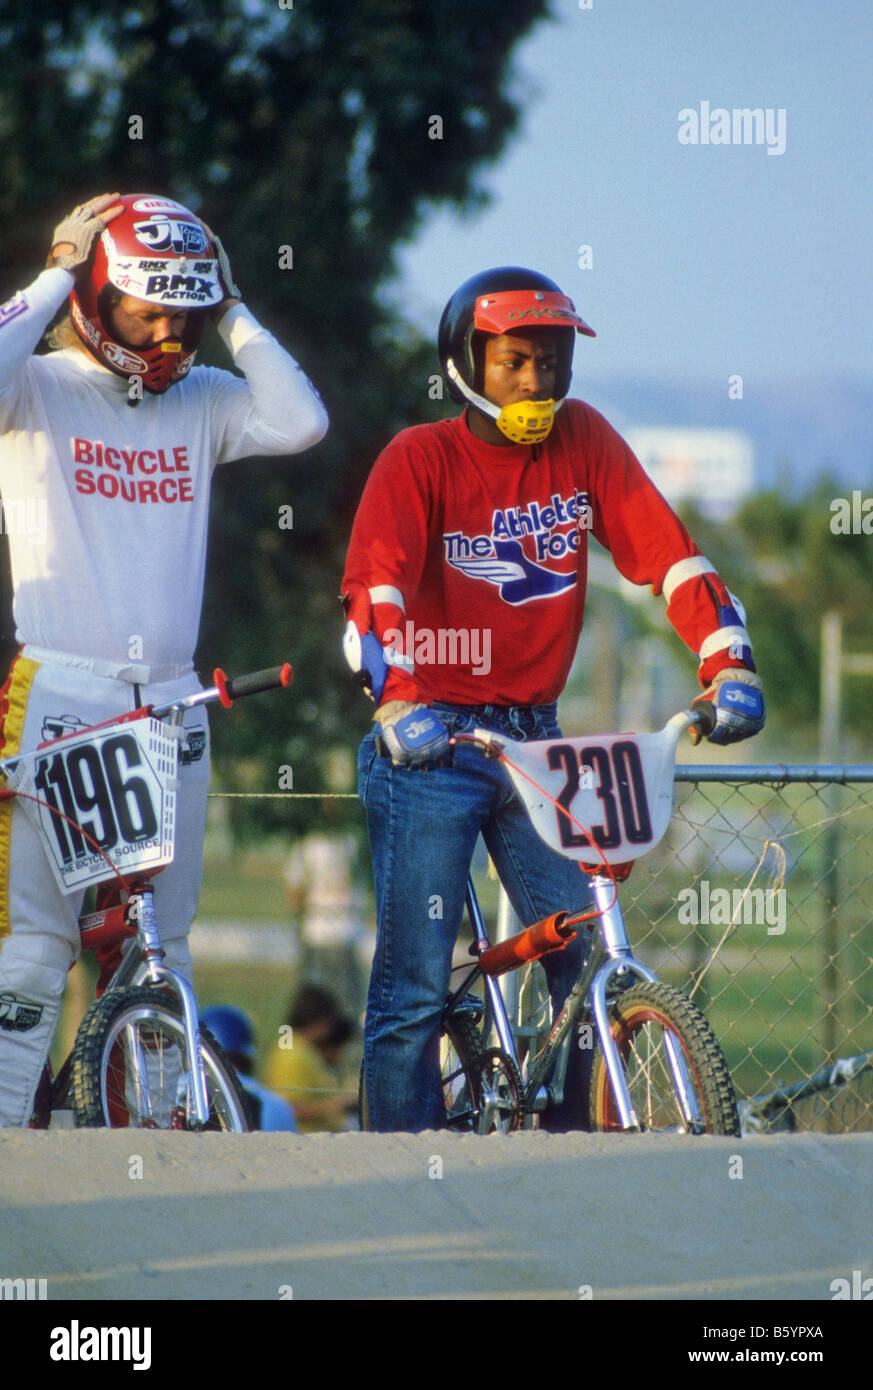 Black boy and white boy get ready to race bicycles at bicycle motocross event. Stock Photo